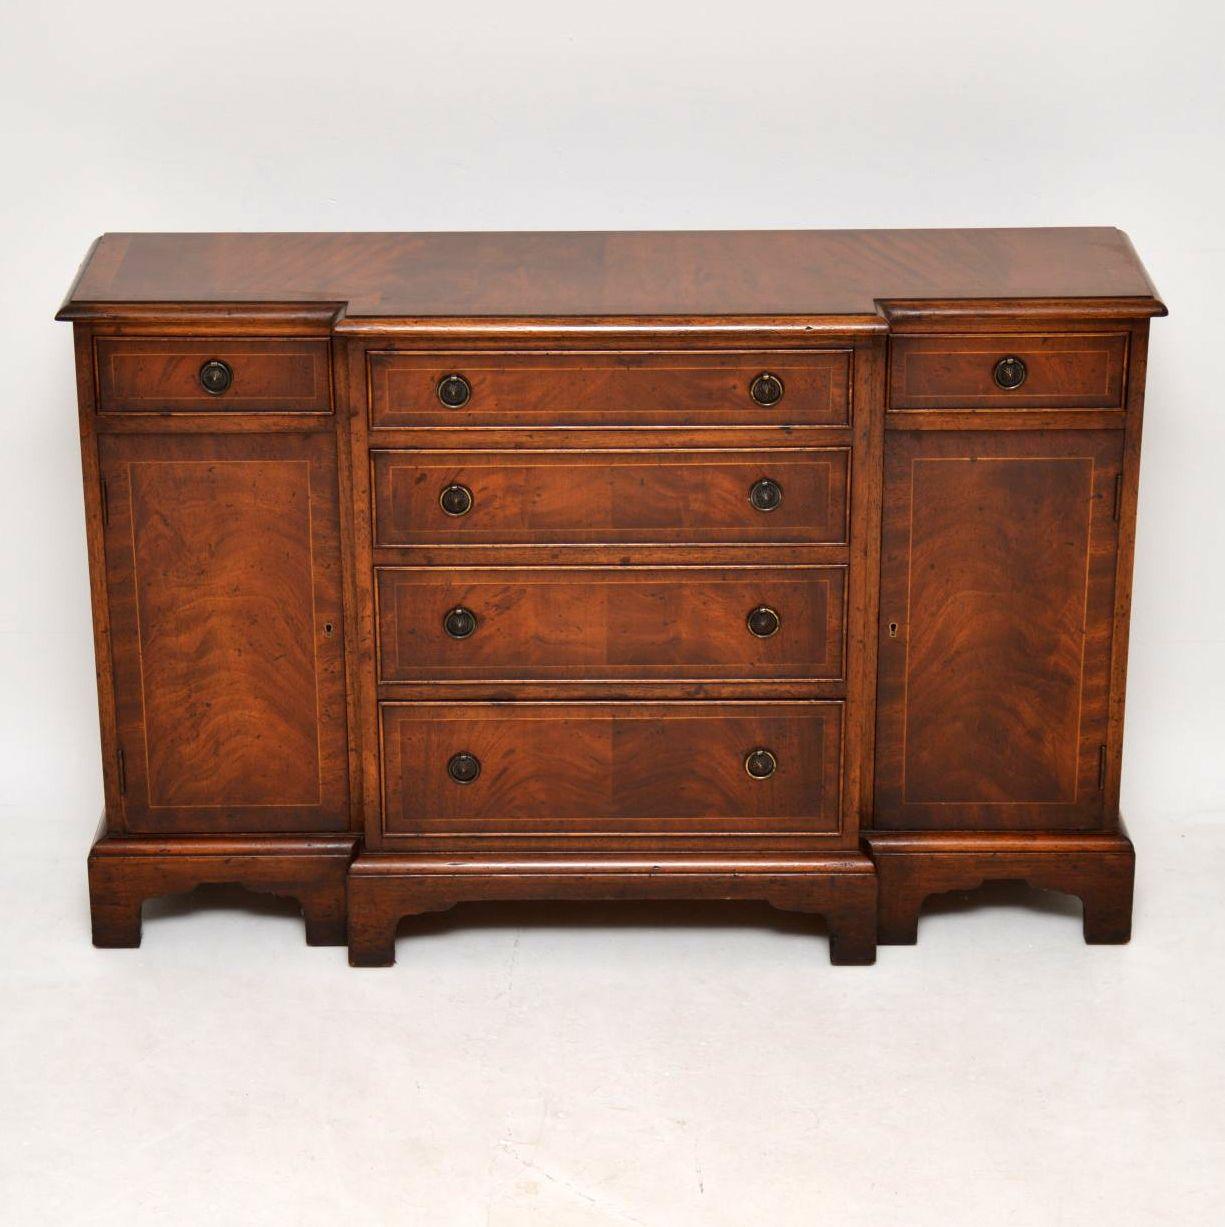 Small antique flame mahogany breakfront chiffonier sideboard in good original condition, showing a lot of character, good patina, wonderful figuring and natural ageing. The top is cross banded and inlaid as are the drawers and cupboards. The drawers